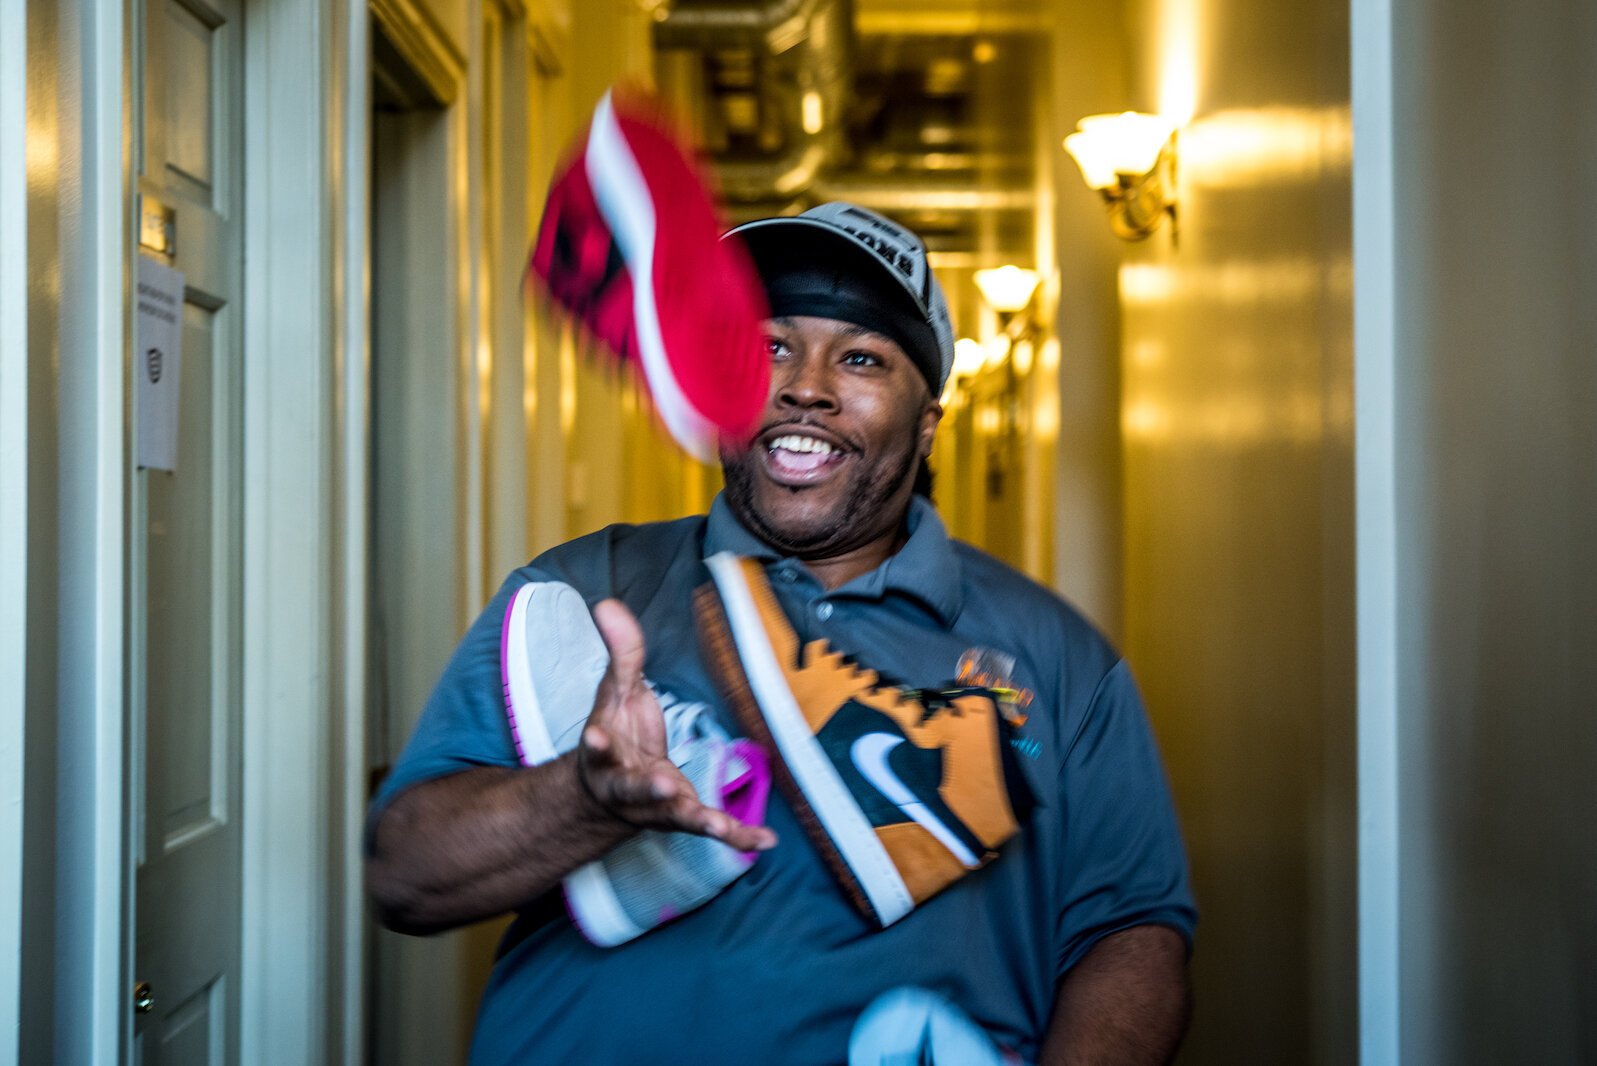 Roosevelt Lee-Fleming became used to juggling problems as he started his Kalamazoo business, The Drip Sneakers. Trendy sneakers were something his parents wouldn’t pay for when he was a teen.